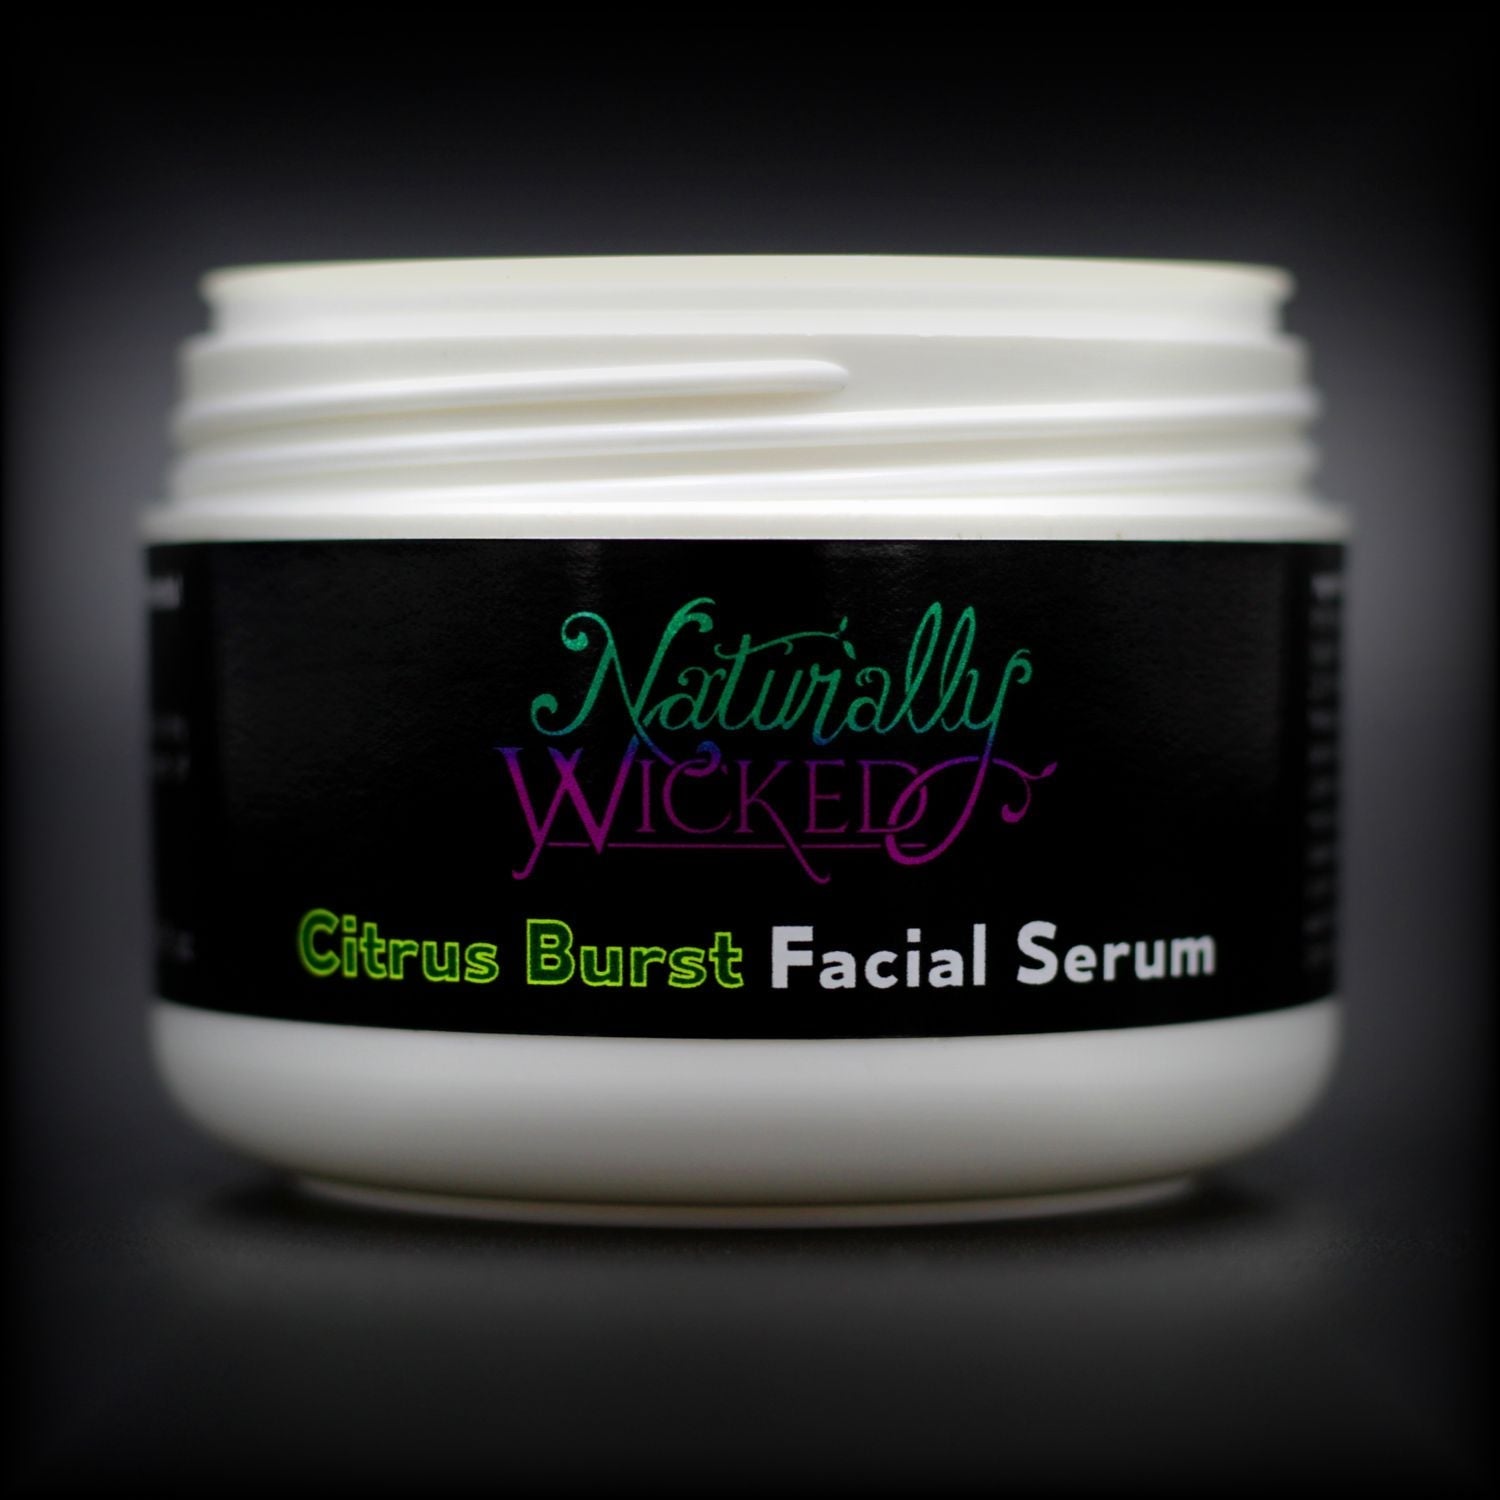 Naturally Wicked Citrus Burst Facial Serum Container Without Lid, Exposing Screw Connection & Seal